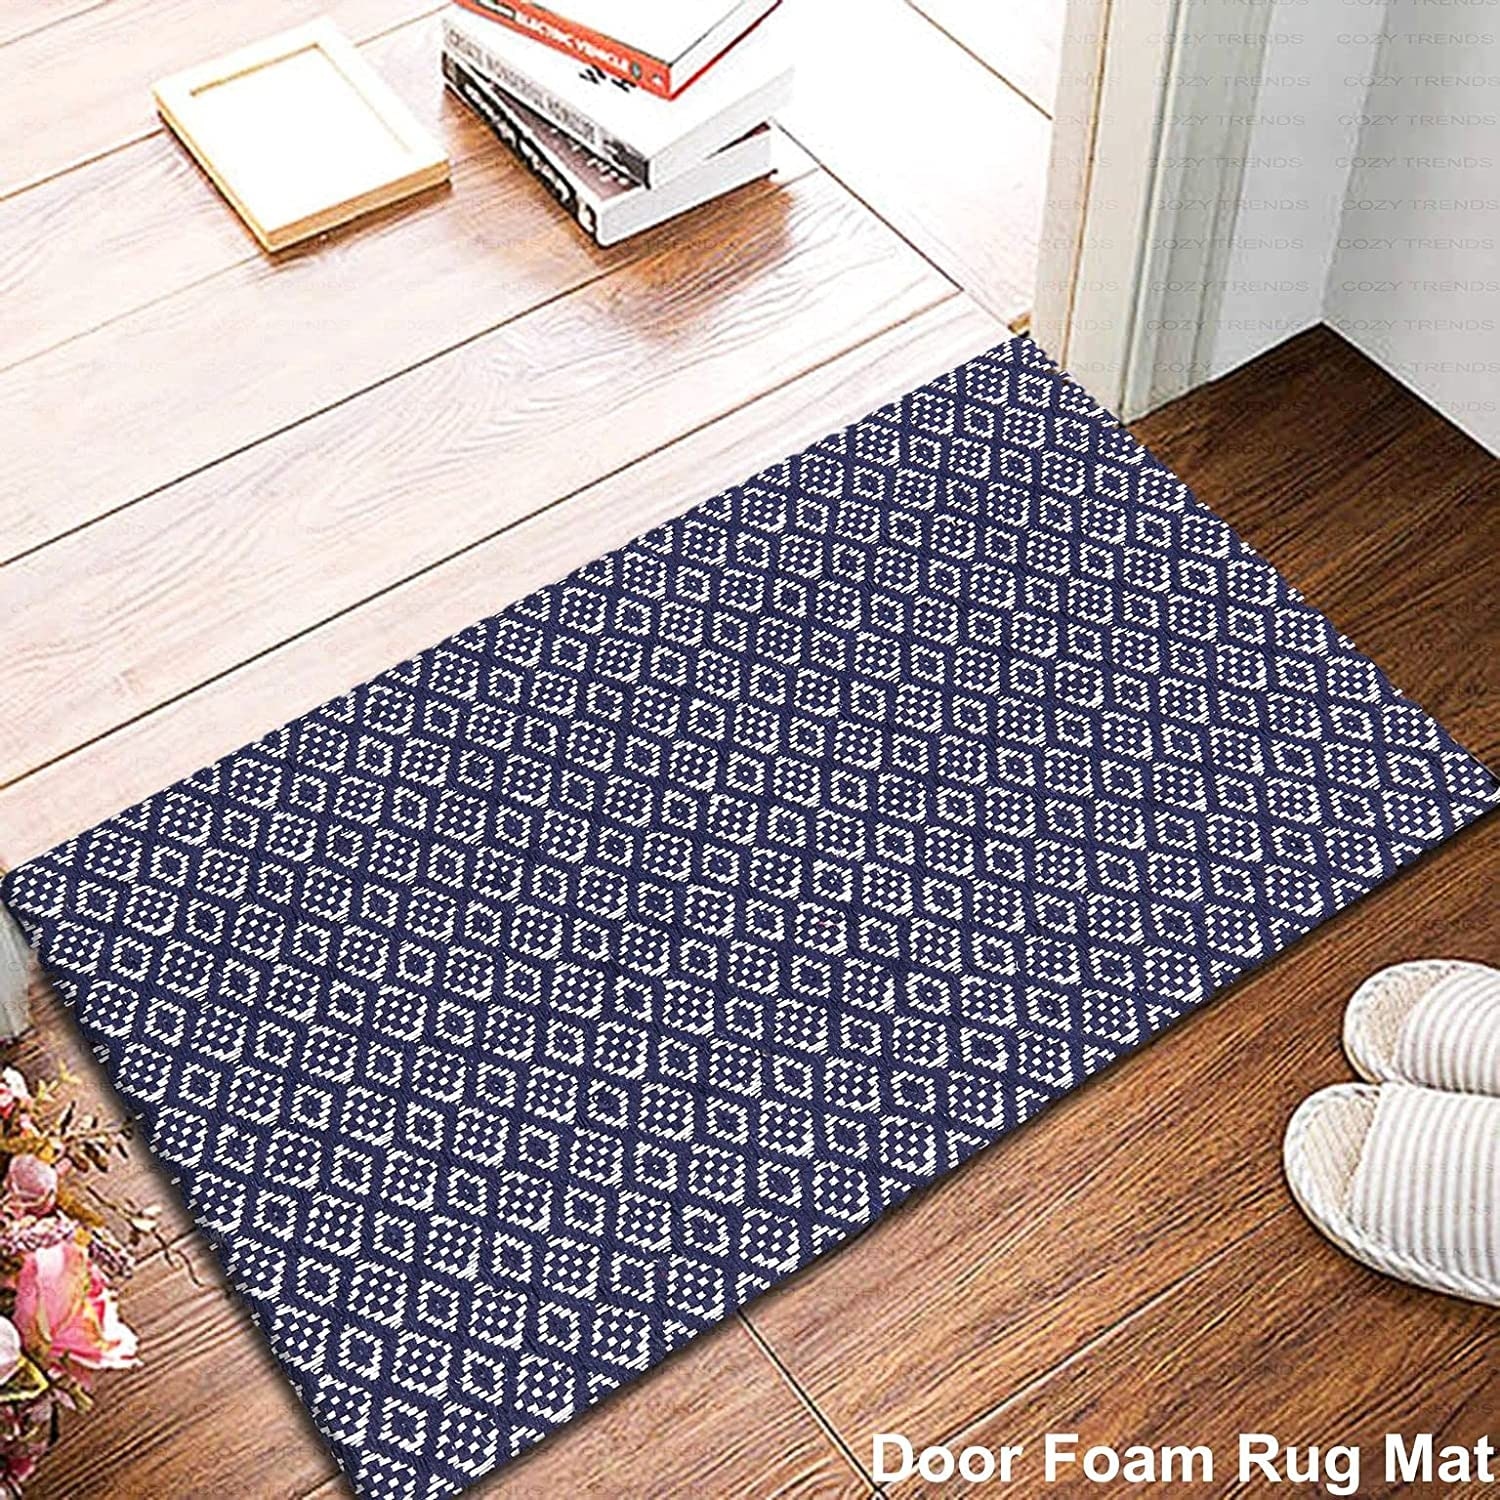 https://ak1.ostkcdn.com/images/products/is/images/direct/8ddf3b2791d59d57b721f9b9e2a90f457313dba2/Cotton-Kitchen-Mat-Cushioned-Anti-Fatigue-Rug%2C-Non-Slip-Mats-Comfort-Foam-Rug-for-Kitchen%2C-Office%2C-Sink%2C-Laundry---18%27%27x30%27%27.jpg